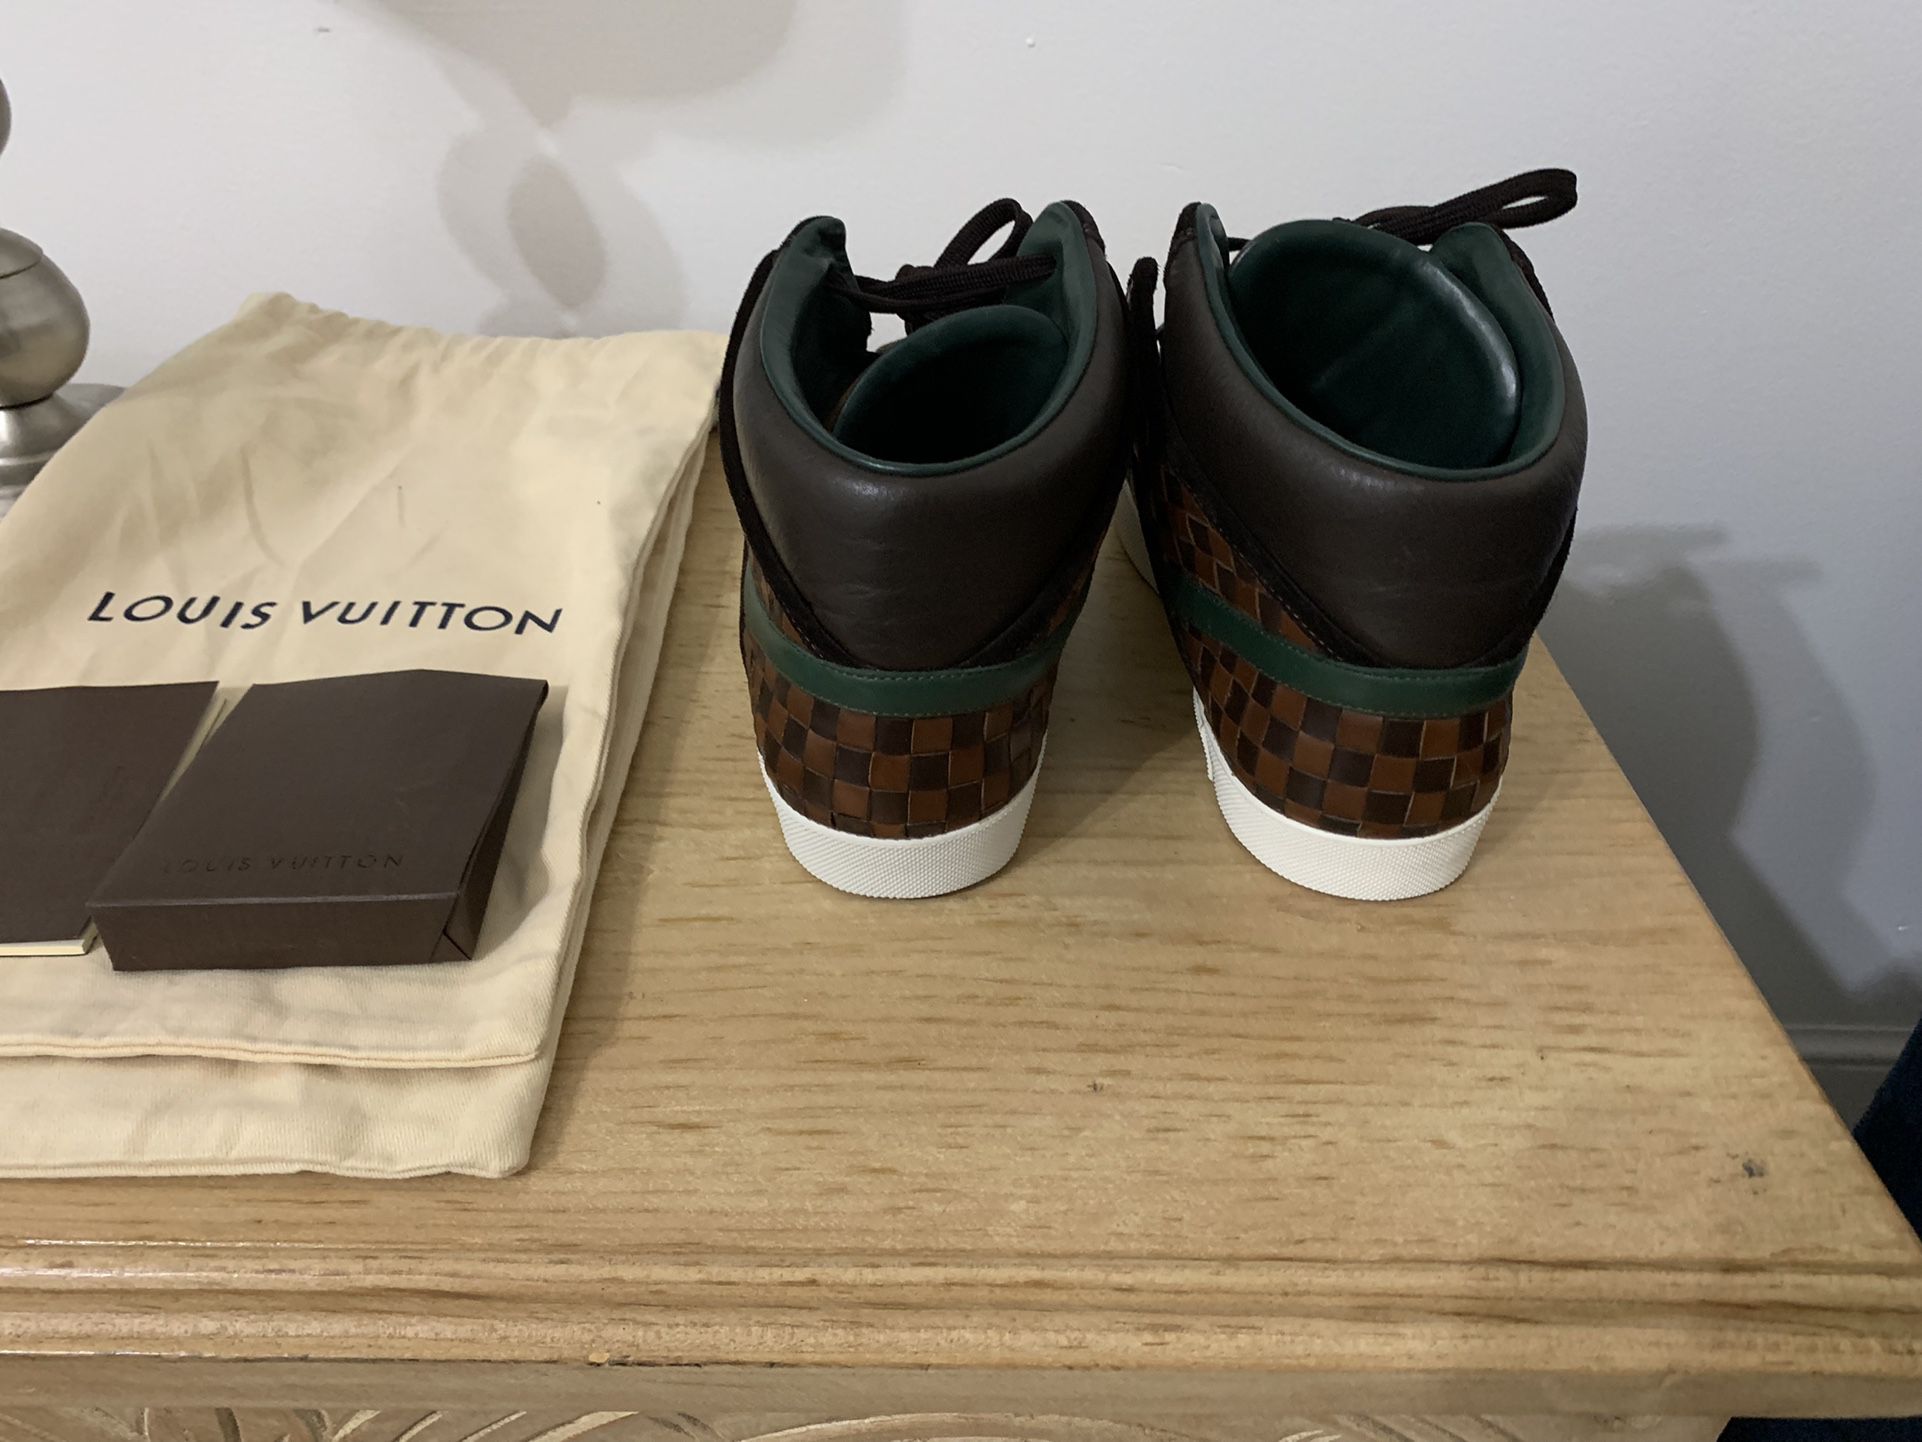 Amiri and Louis Vuitton men's sneakers for Sale in Carol City, FL - OfferUp